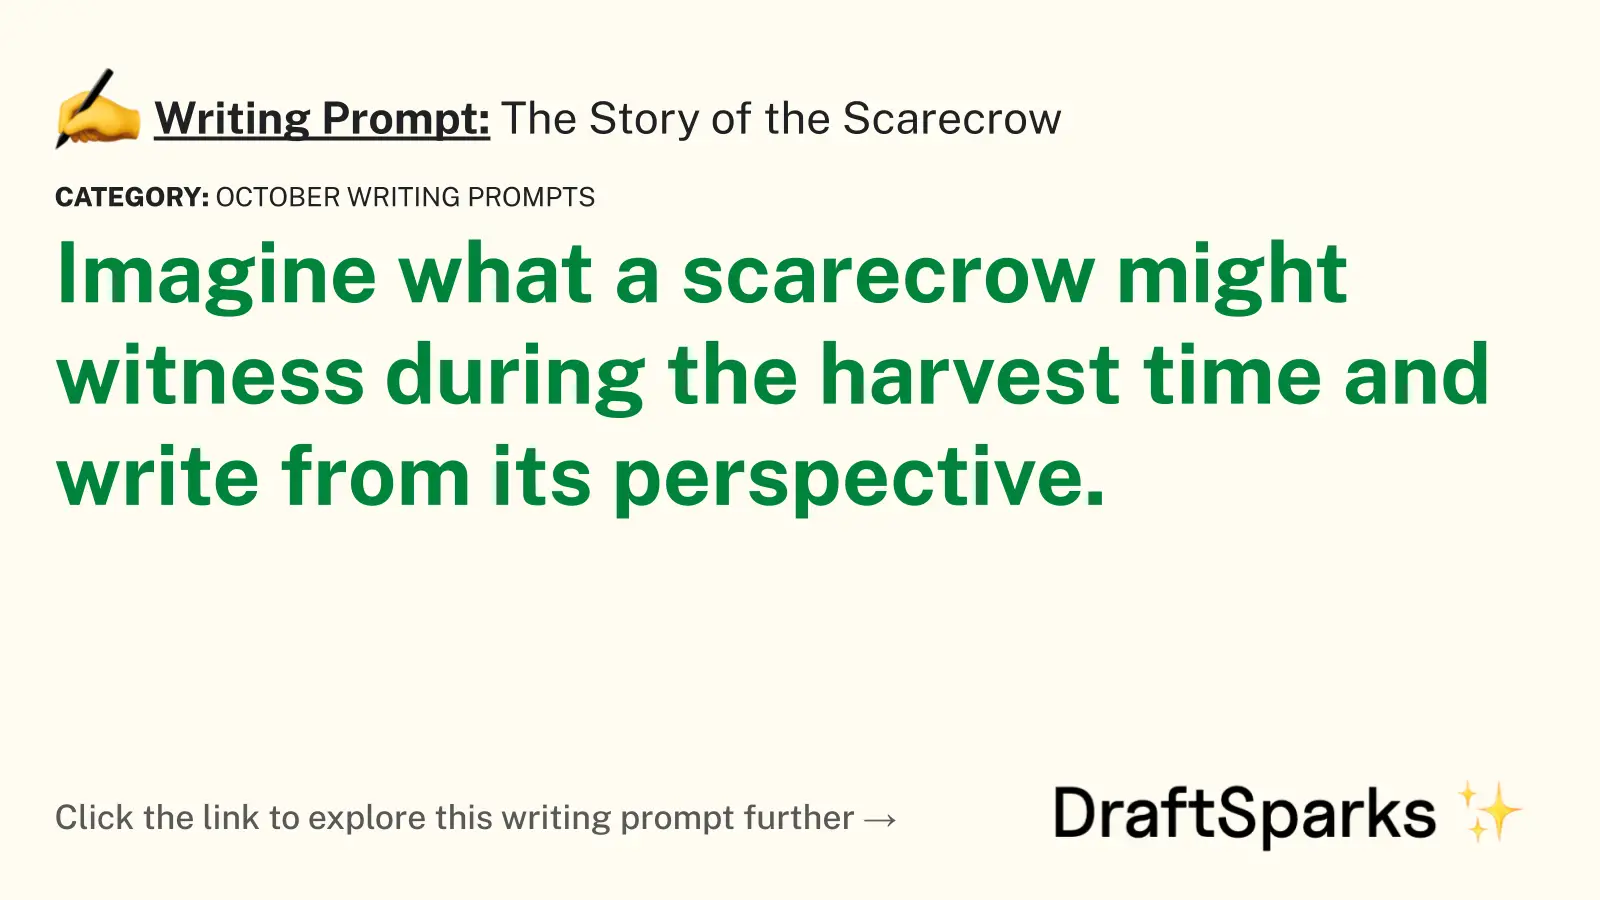 The Story of the Scarecrow